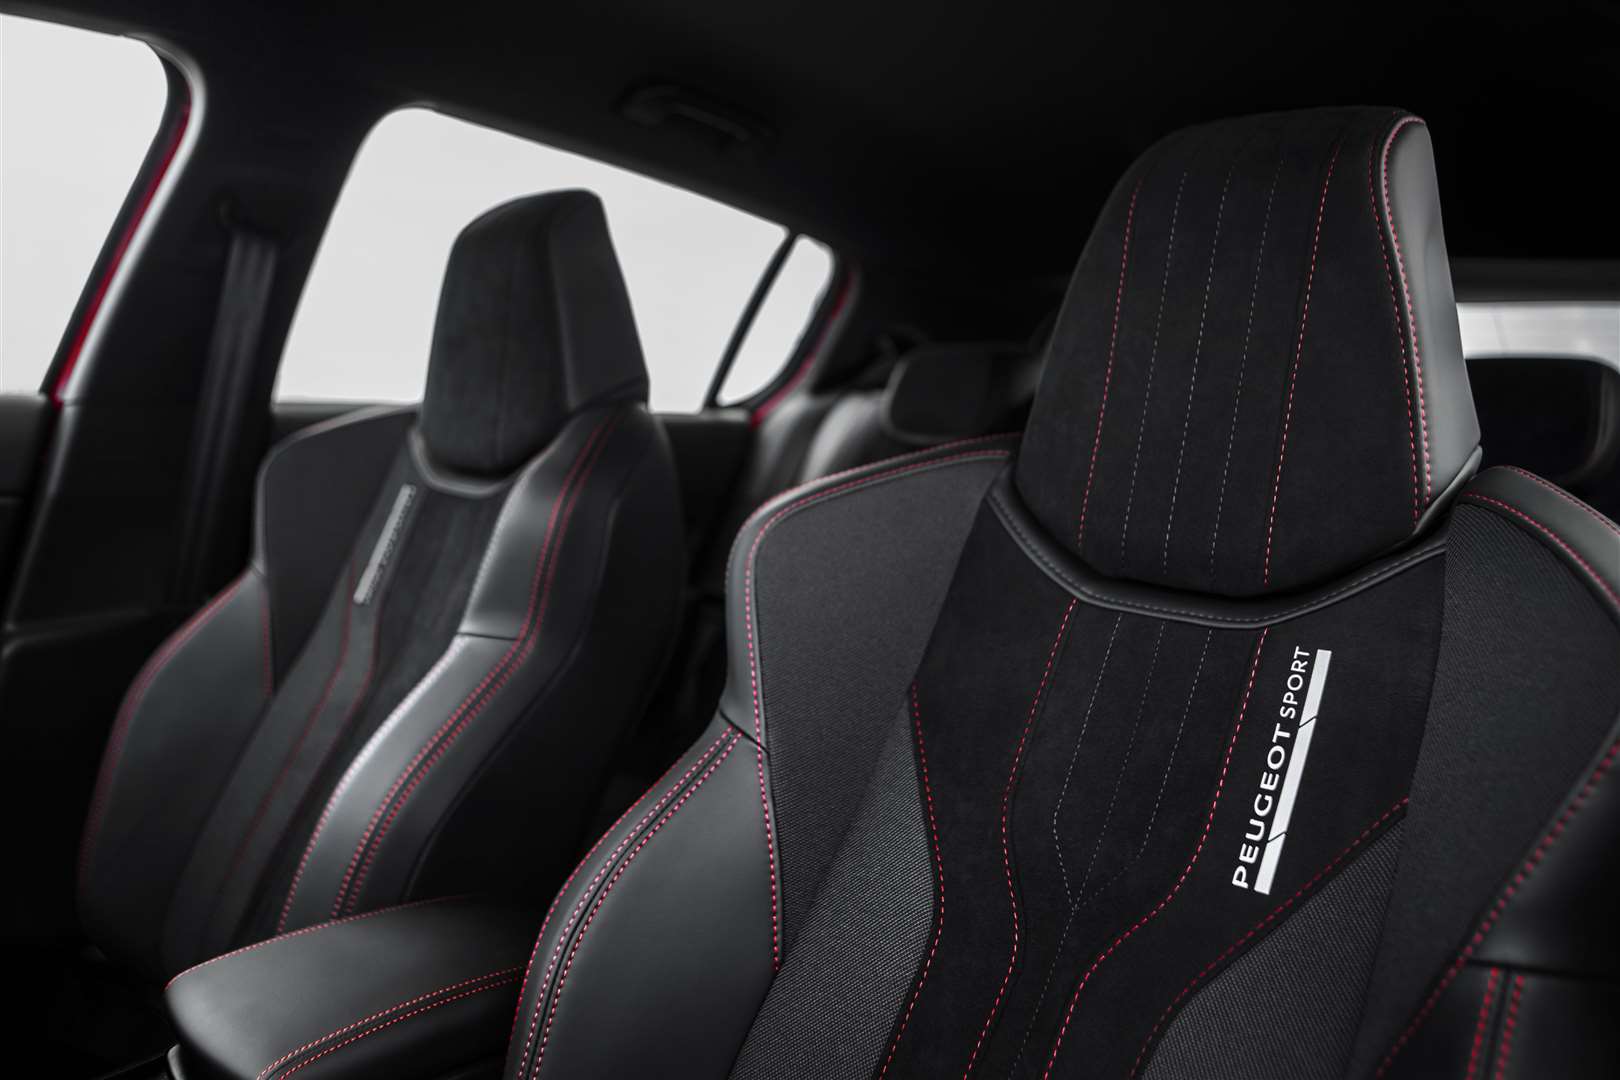 The sports seats are very supportive and comfortable